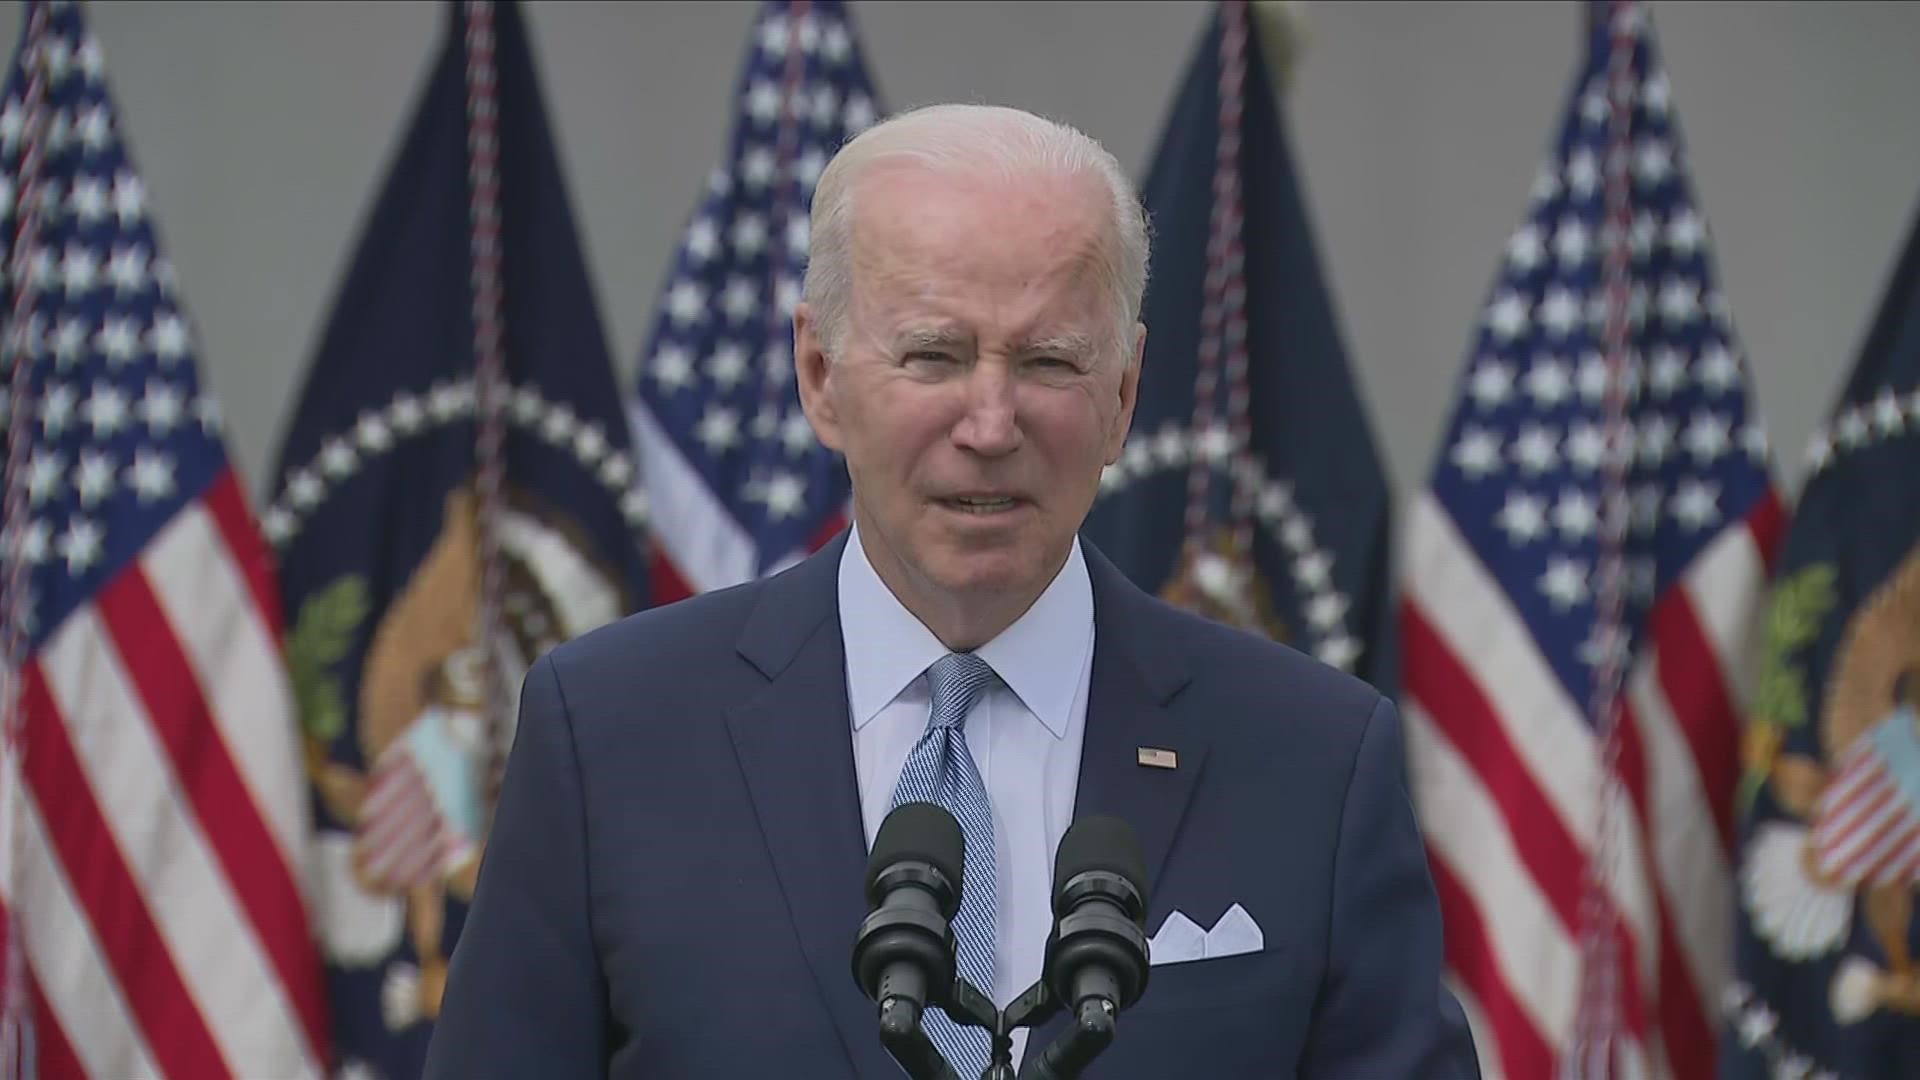 "Expect federal prosecution," Biden warned people who do not properly mark firearm and gun parts with serial numbers.